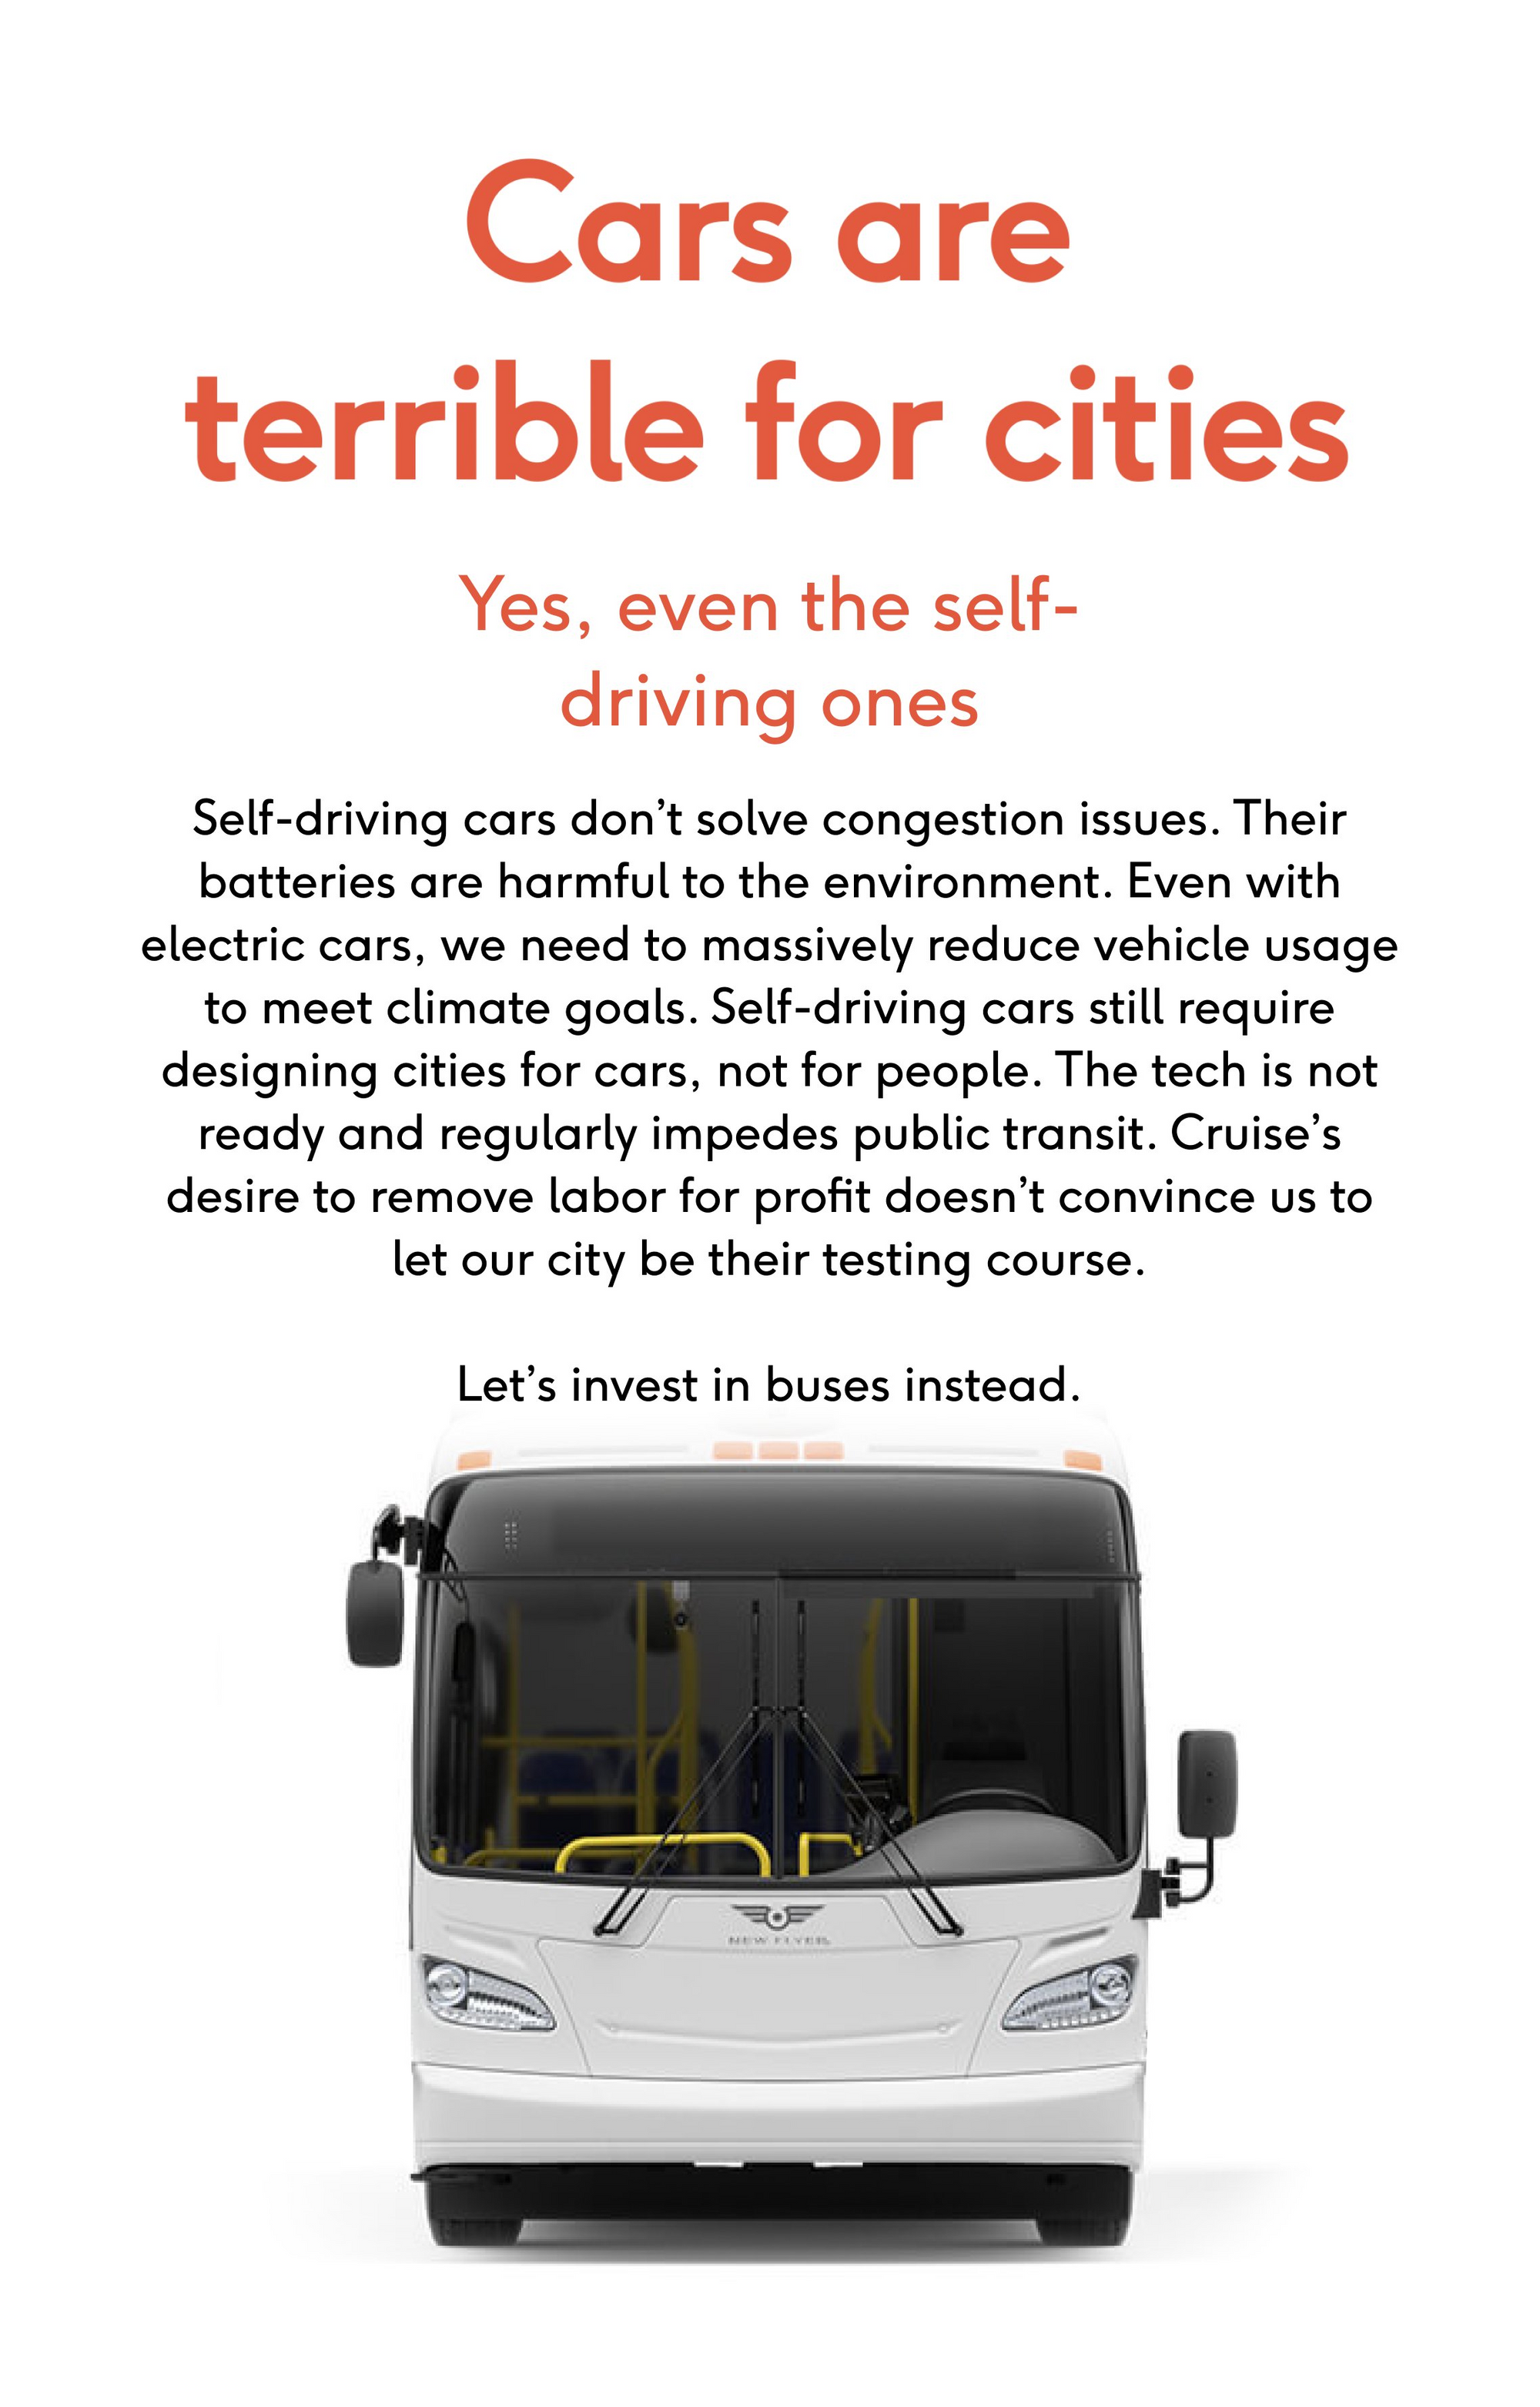 Cars are terrible for cities.  Yes, even the self-driving ones.  Self-driving cars don’t solve congestion issues. Their batteries are harmful to the environment. Even with electric cars, we need to massively reduce vehicle usage to meet climate goals. Self-driving cars still require designing cities for cars, not for people. The tech is not ready and regularly impedes public transit. Cruise’s desire to remove labor for profit doesn’t convince us to let our city be their testing course.  Let’s invest in buses instead.